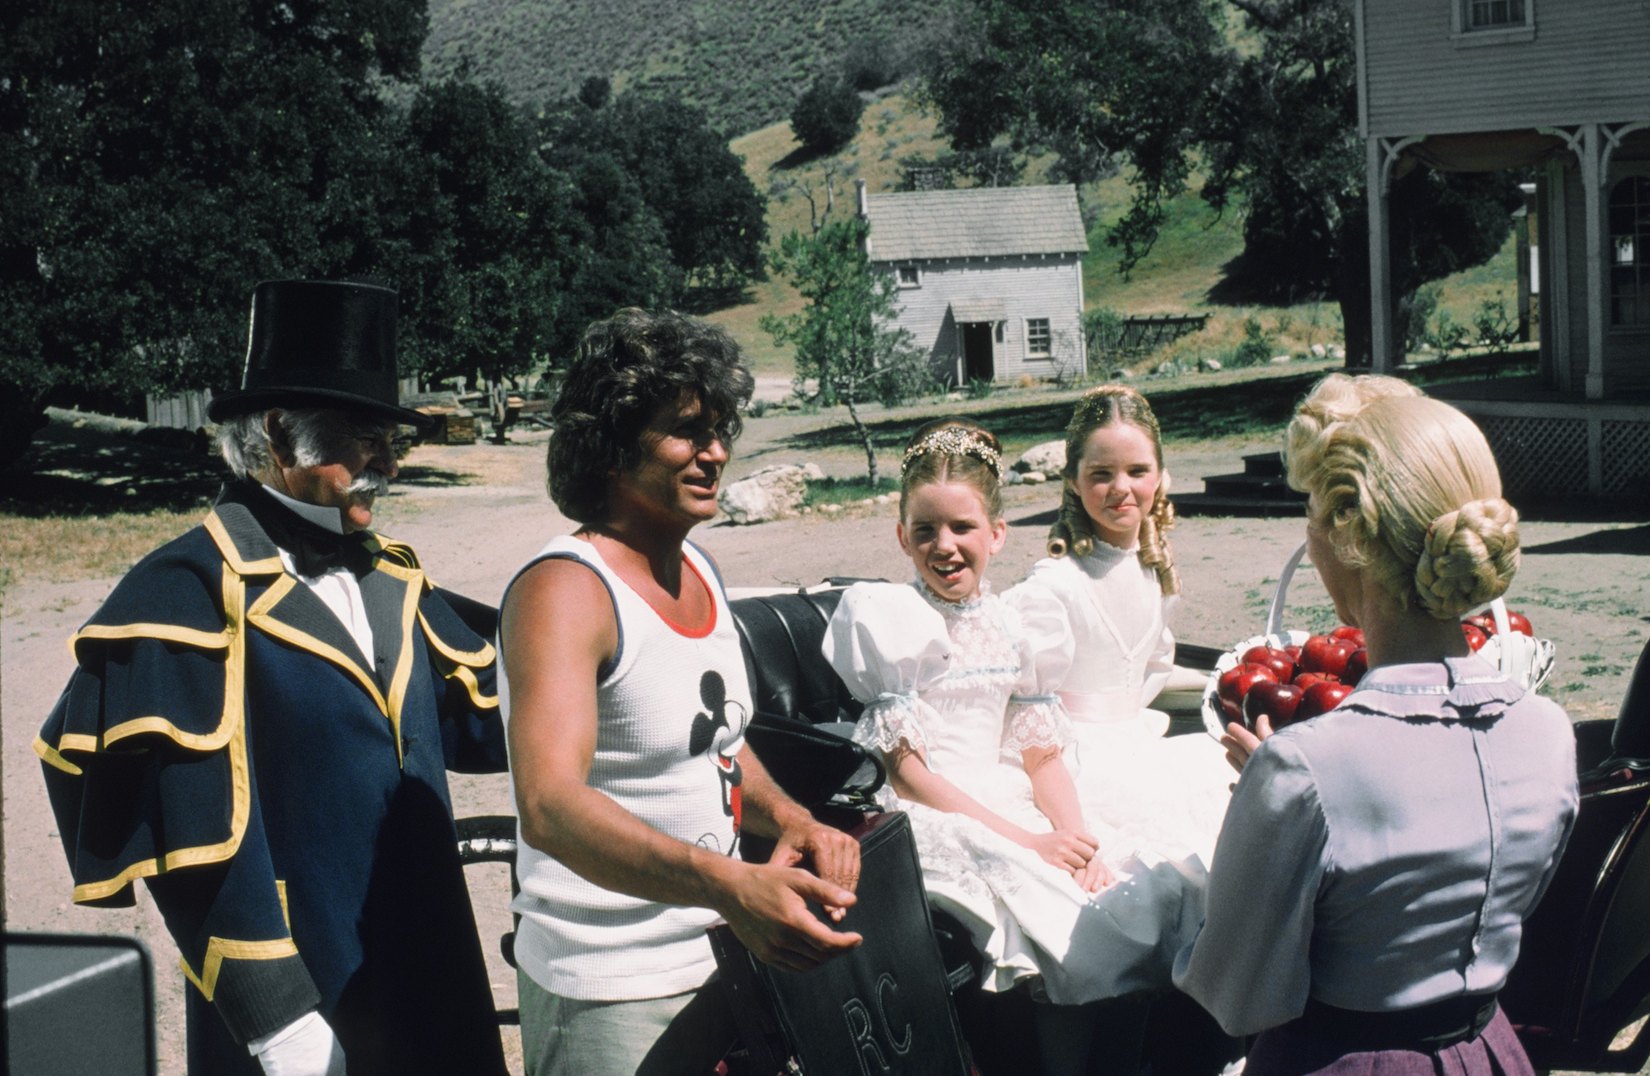 Michael Landon, Melissa Gilbert as Laura Ingalls Wilder, Melissa Sue Anderson as Mary Ingalls Kendall, and Charlotte Stewart as Eva Beadle on 'Little House on the Prairie'